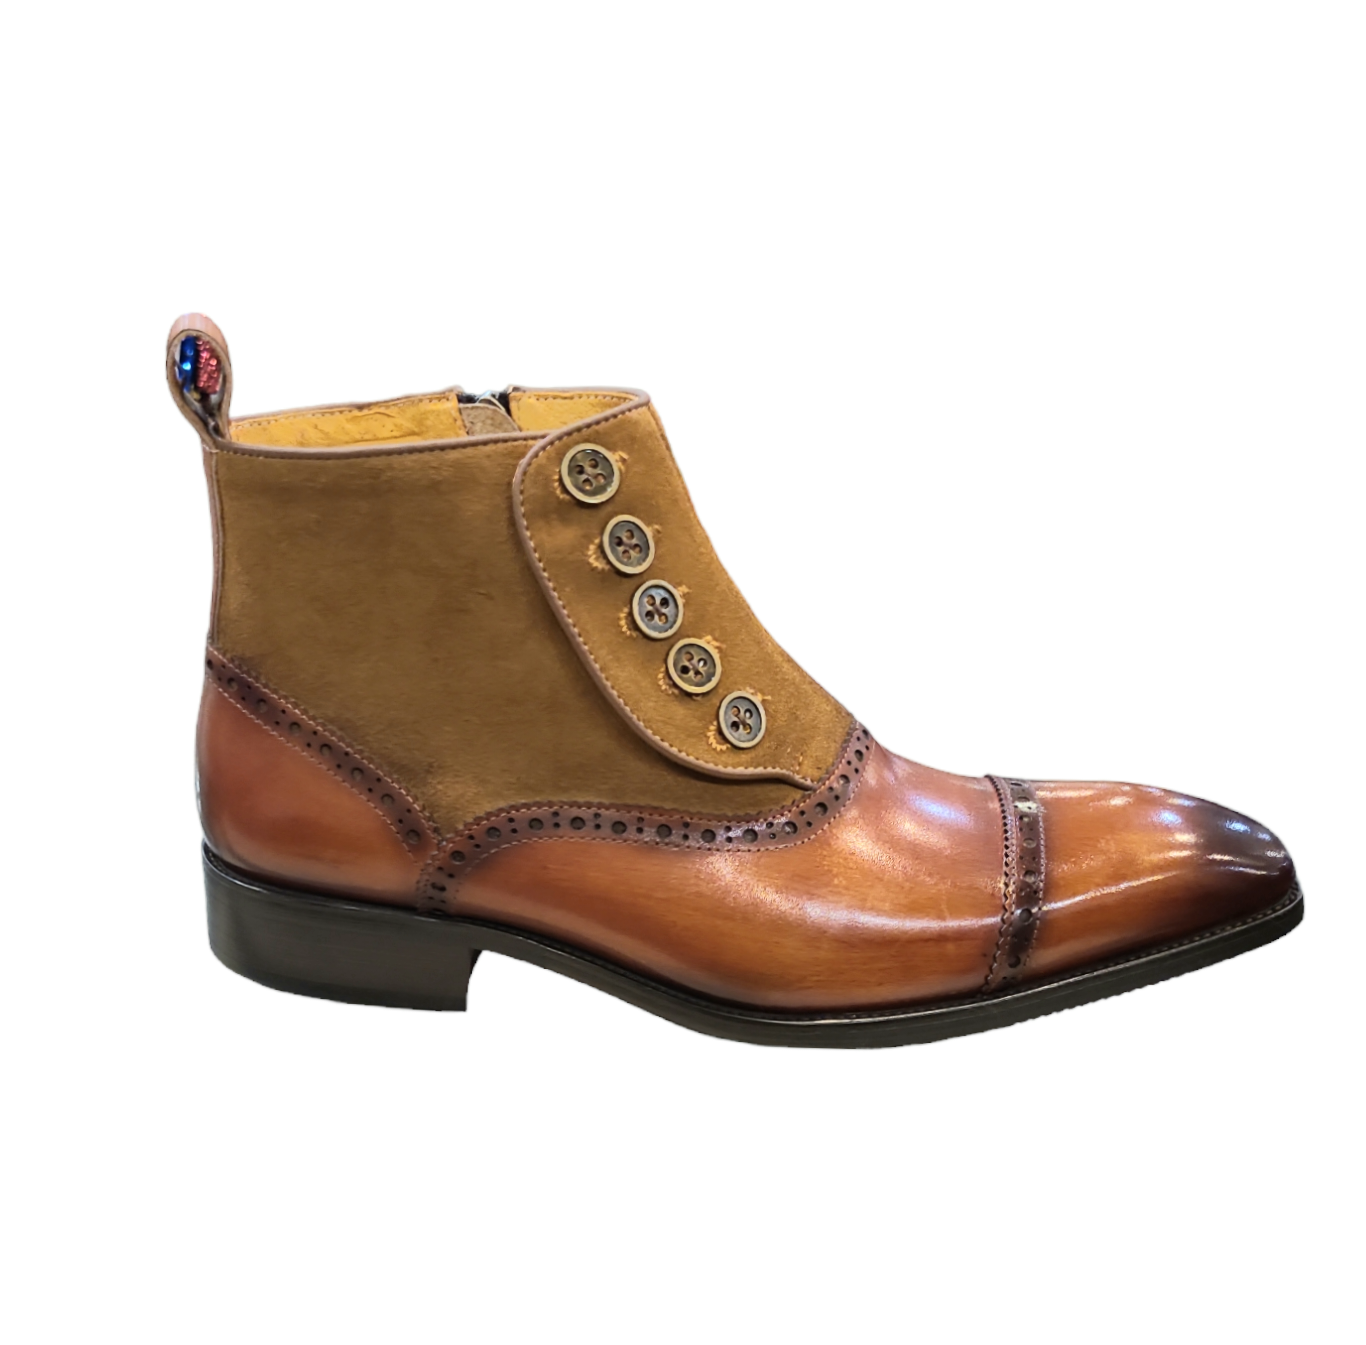 Carrucci High Top Leather Boots